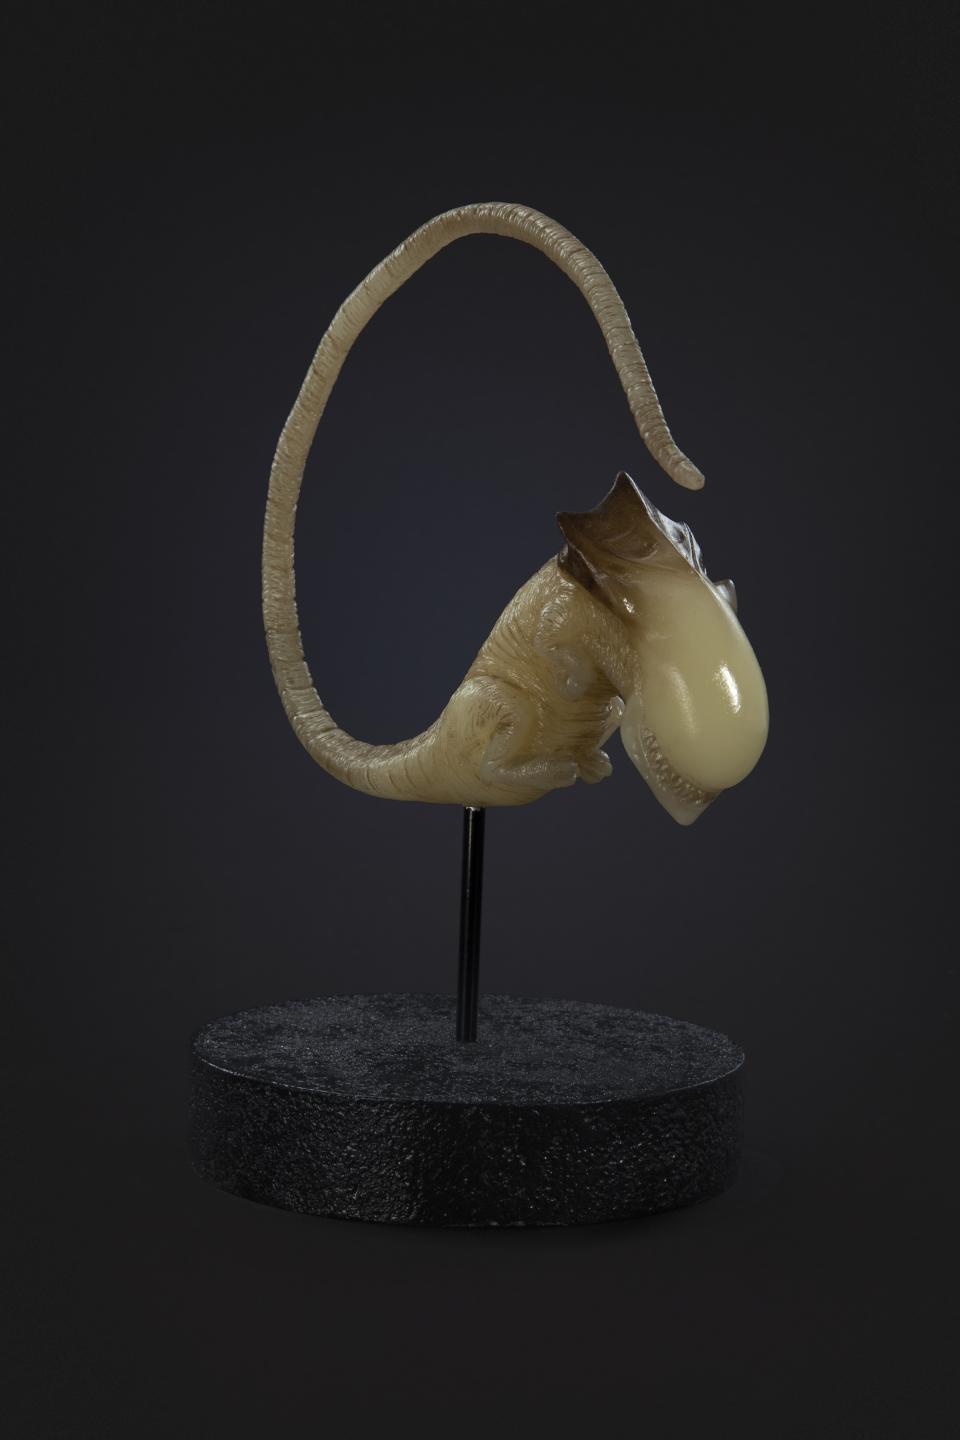 The Queen Alien embryo from the studioADI collection (Photo: studioADI)